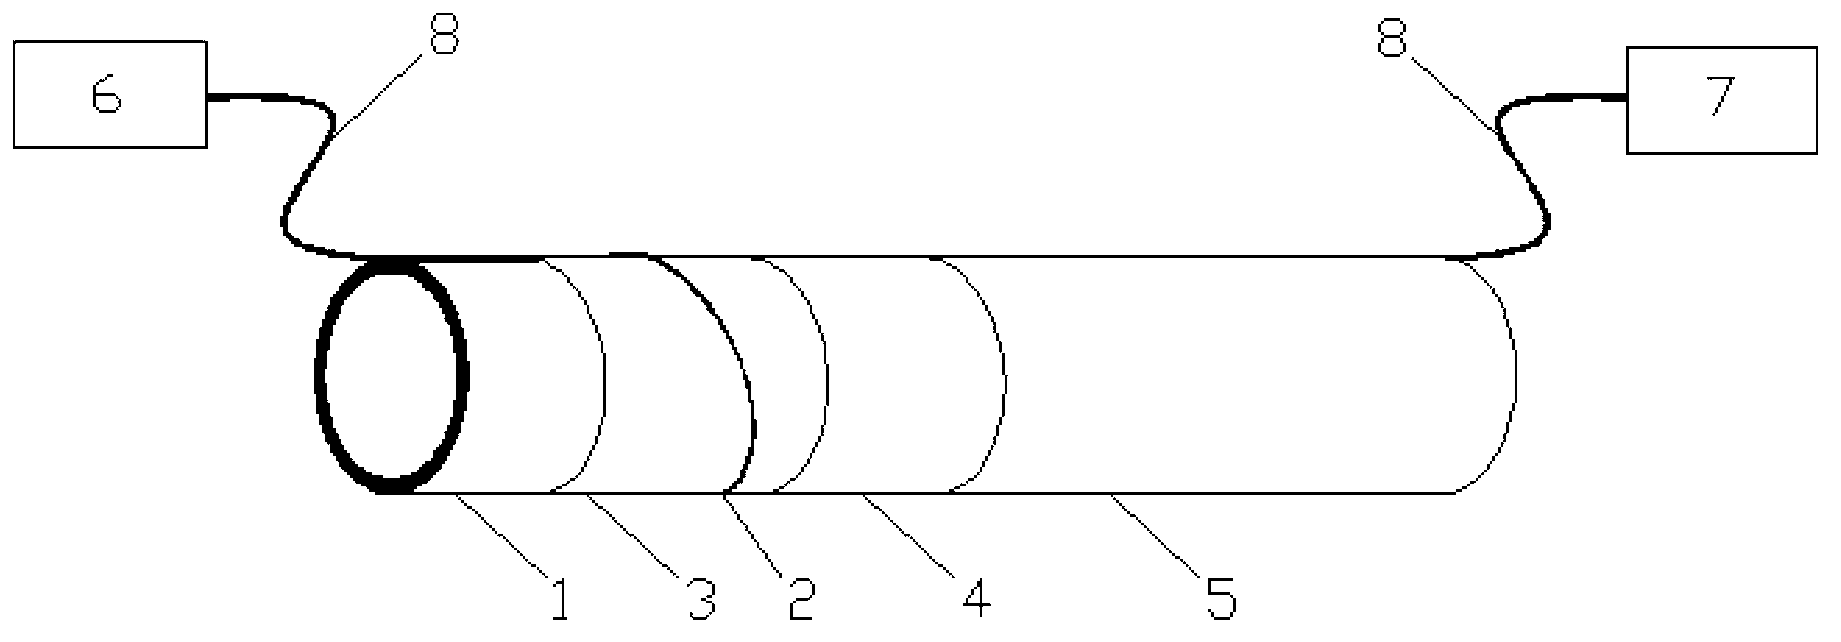 Smart pipeline with optical fiber sensing function and manufacturing method for smart pipeline